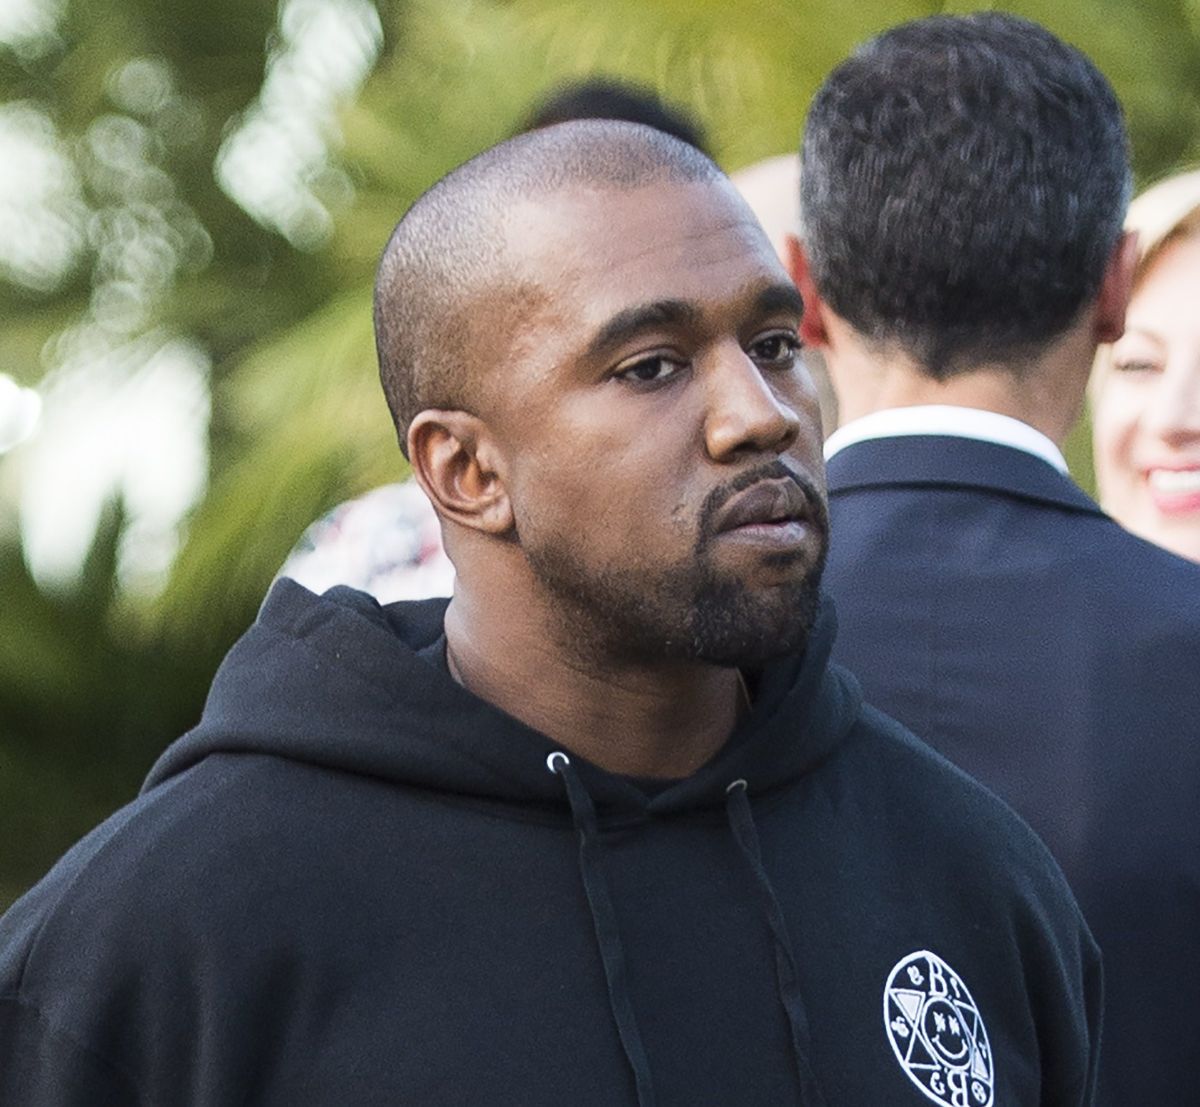 Kanye West goes to the police to denounce some paparazzi who chased him and challenged him to fight